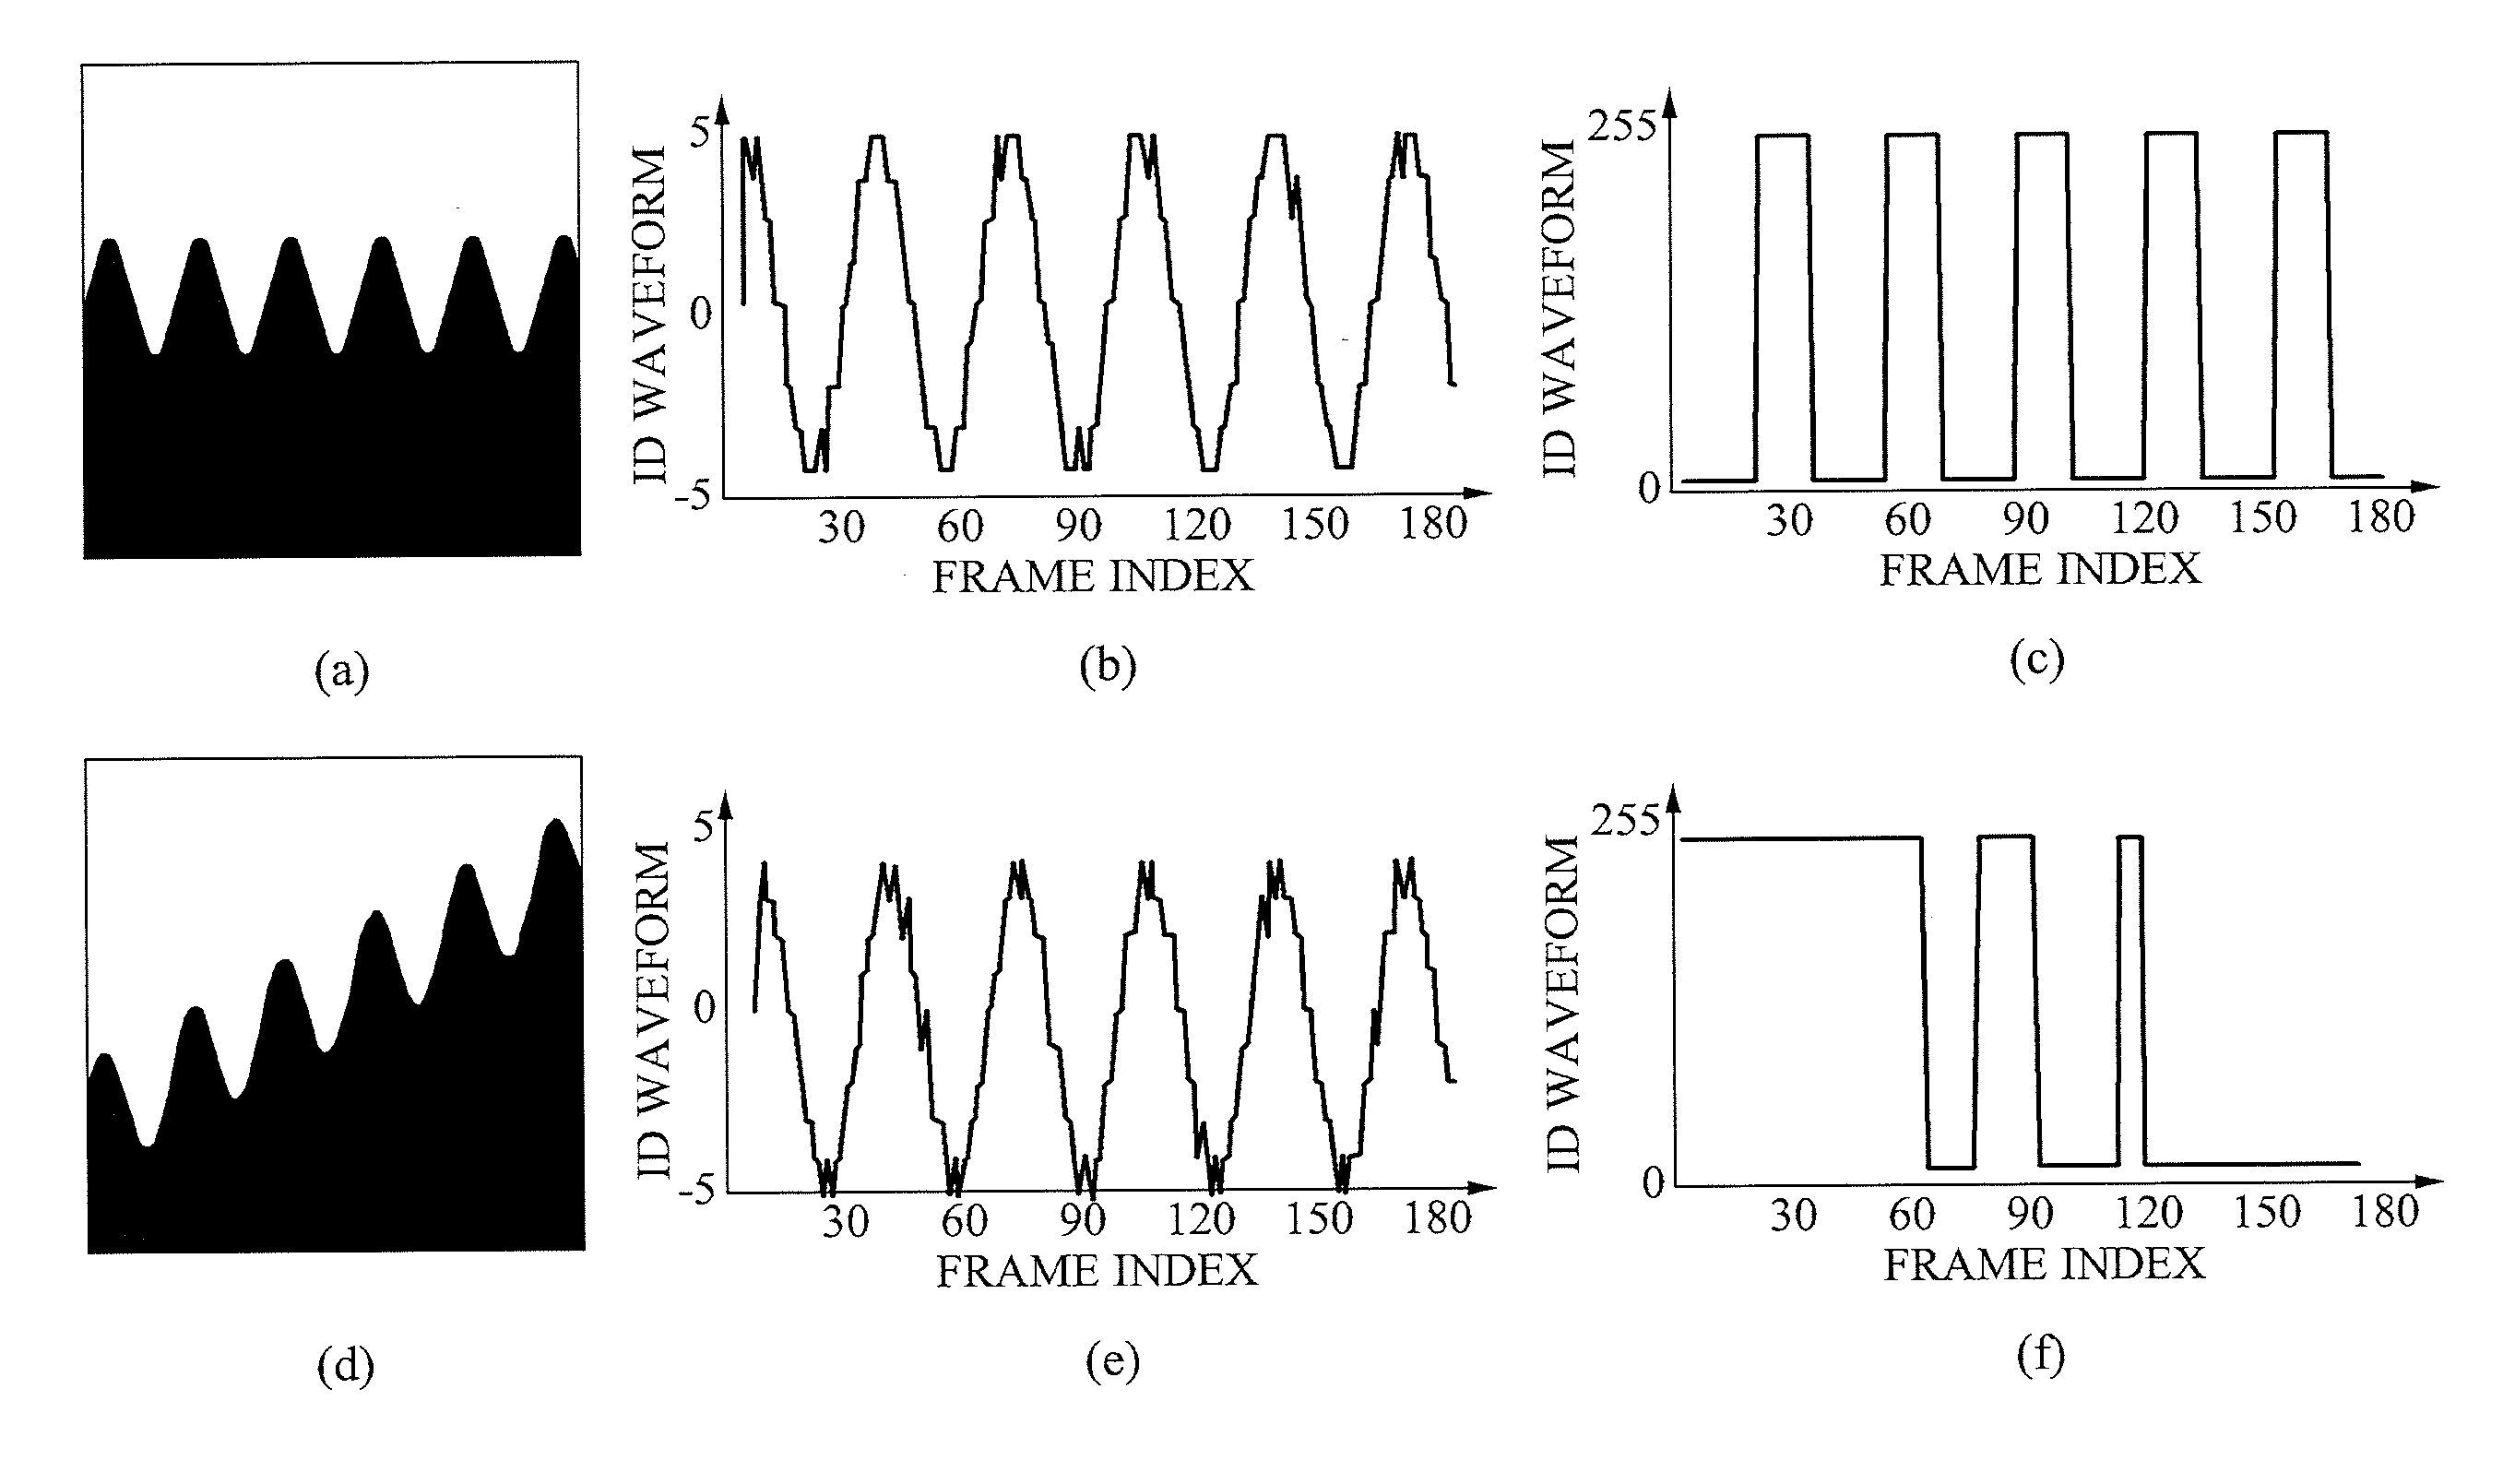 Method and apparatus for analyzing video based on spatiotemporal patterns